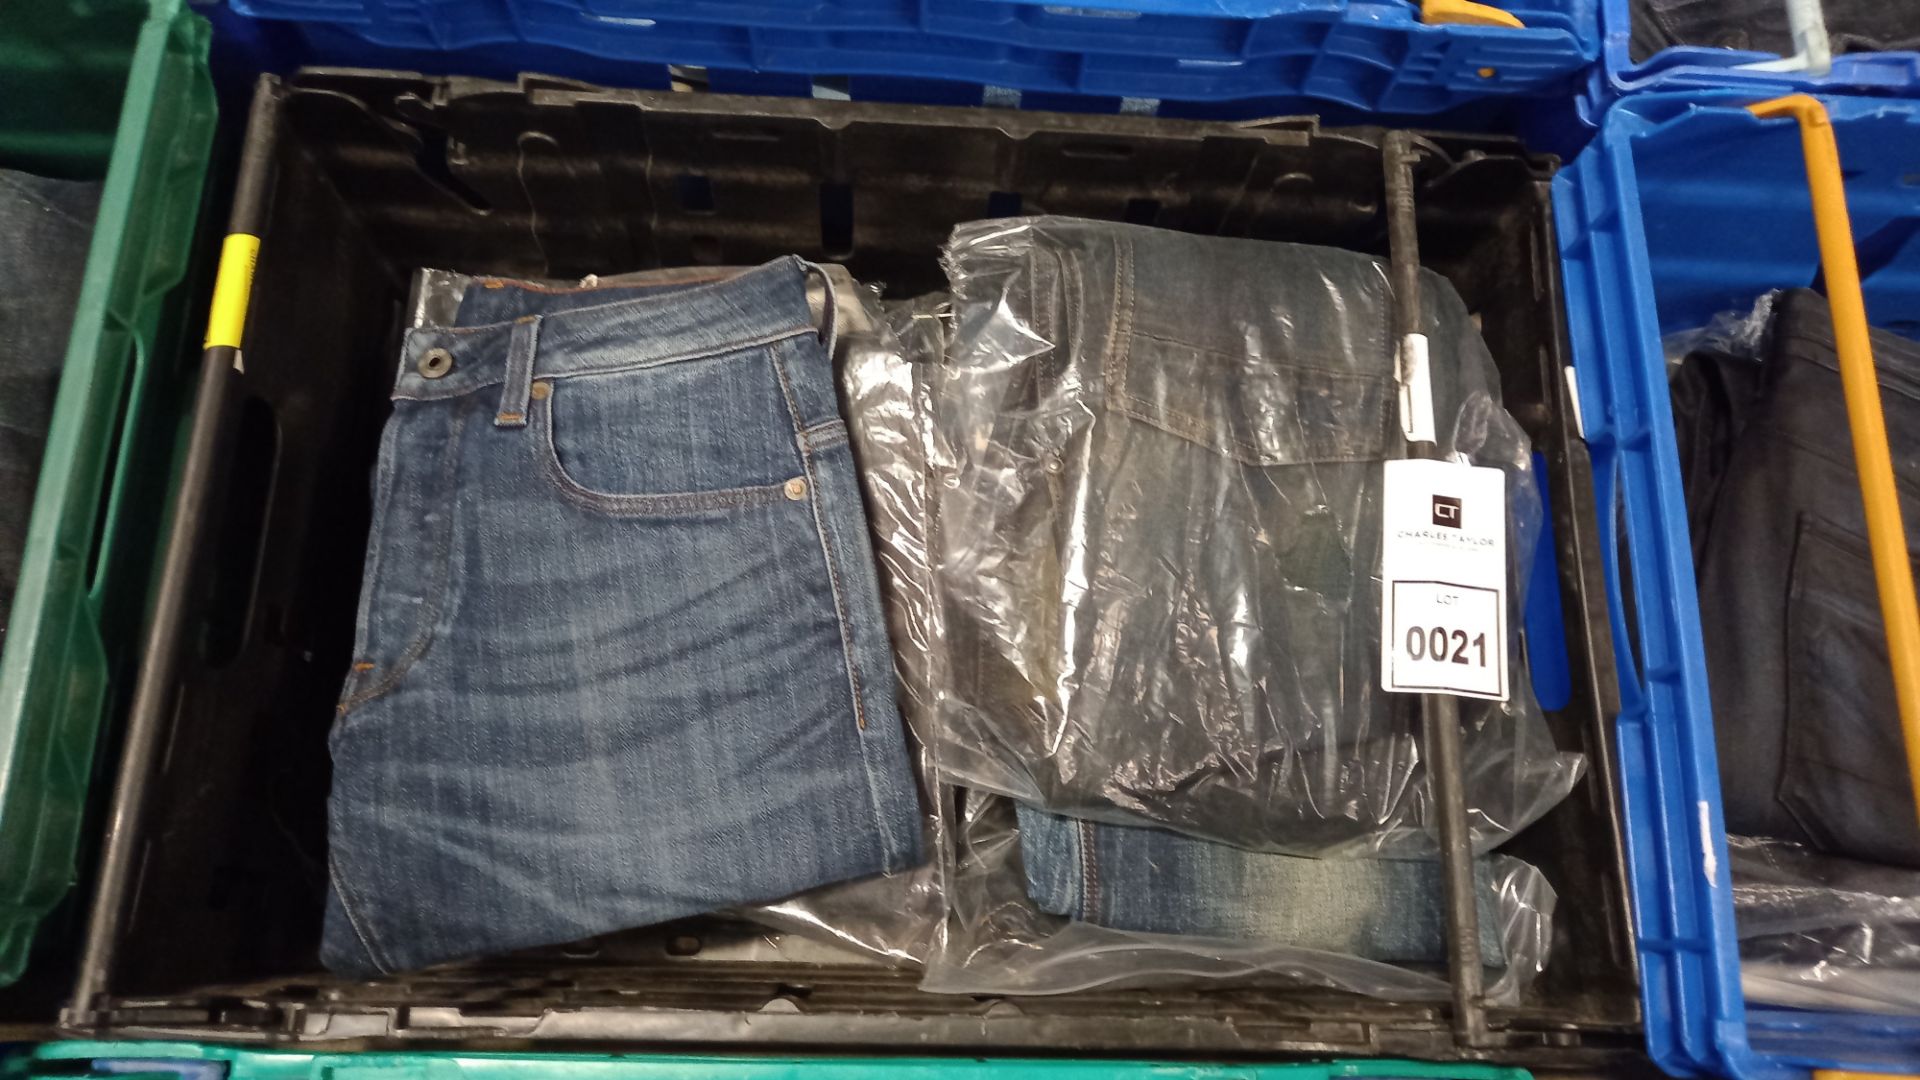 6 X BRAND NEW G STAR JEANS IN VARIOUS STYLES AND SIZES IE LIGHT BLUE, DARK BLUE, GREY AND BLACK ETC - Image 2 of 2